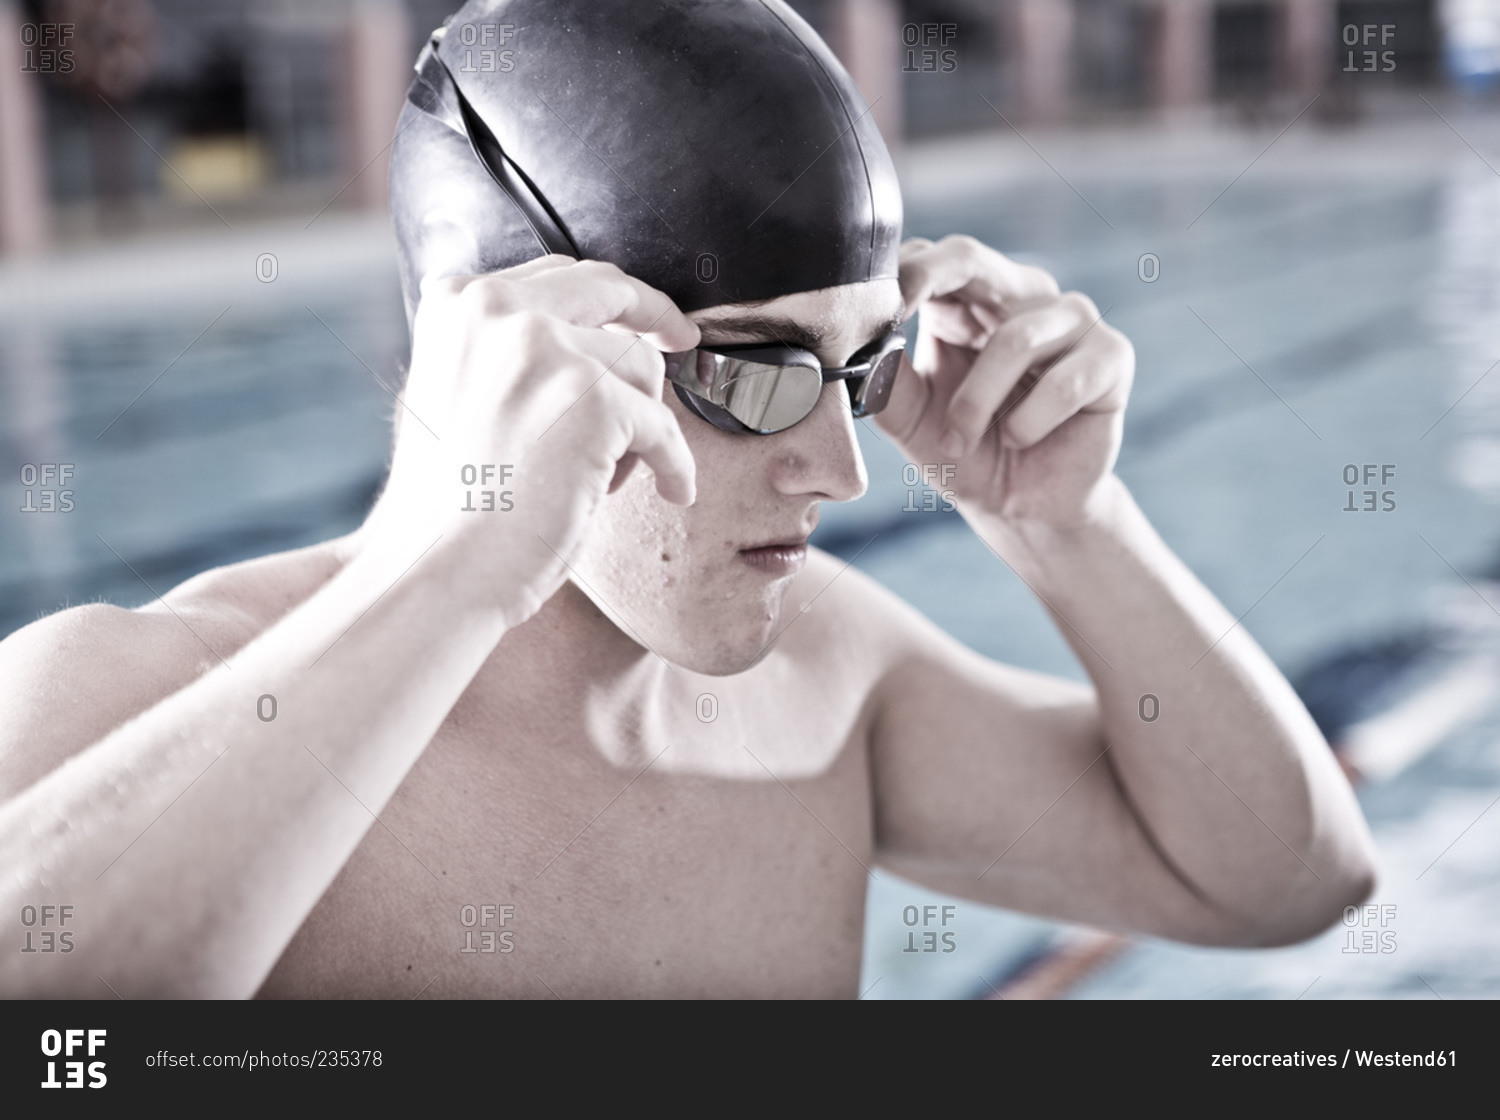 Swimmer in indoor pool putting on swimming goggles